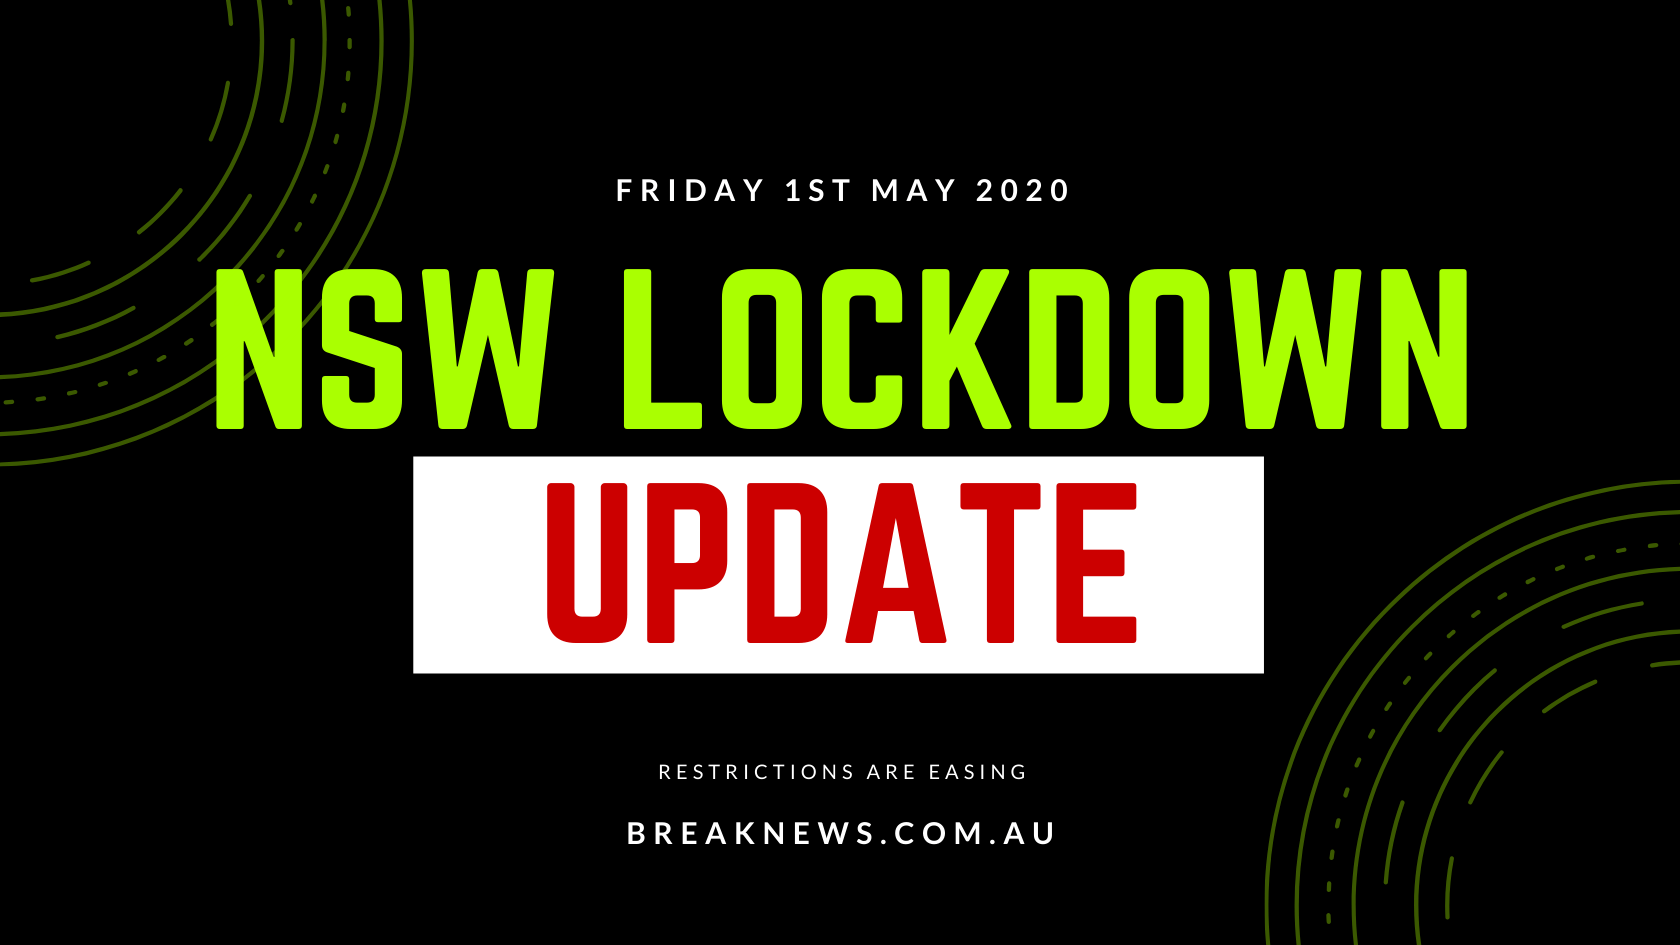 nsw lockdown lifted